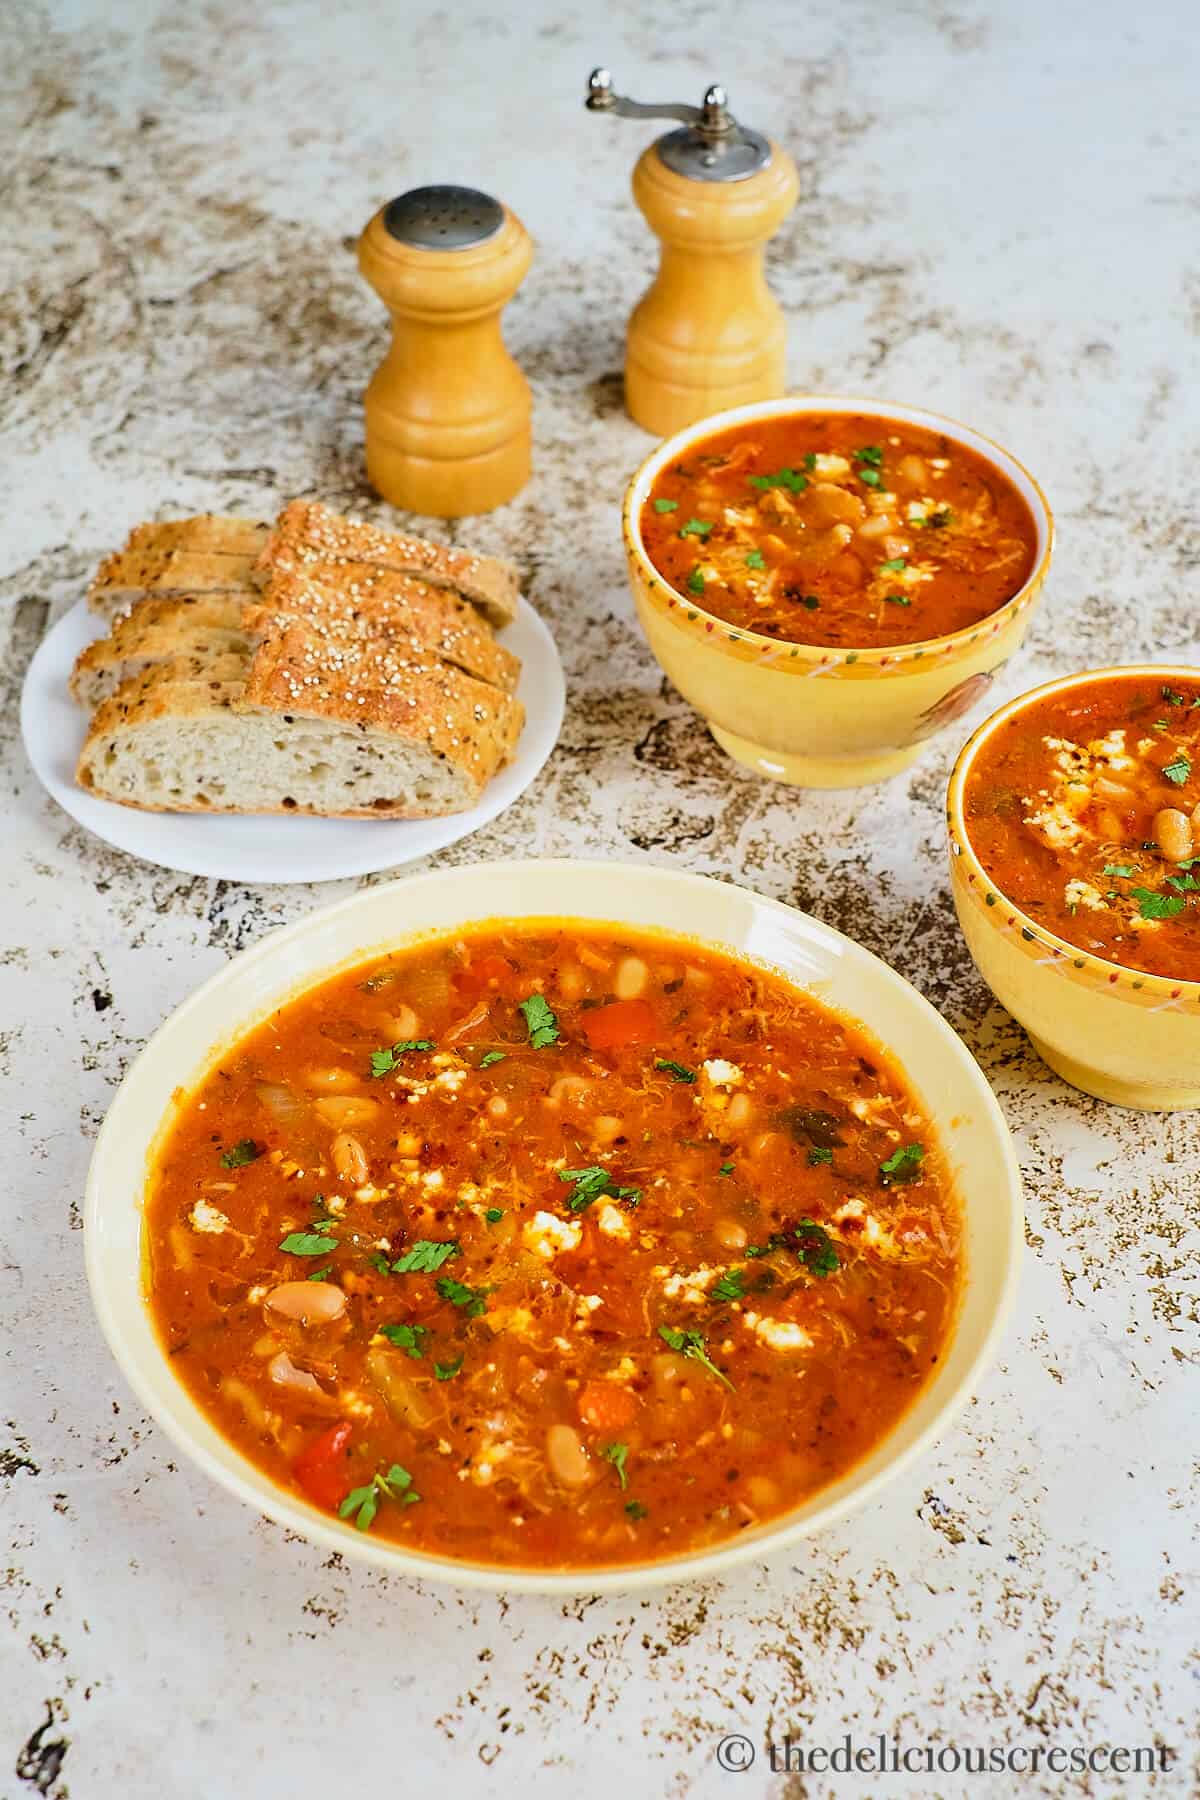 Rich bean soup with vegetables and bread on the table.